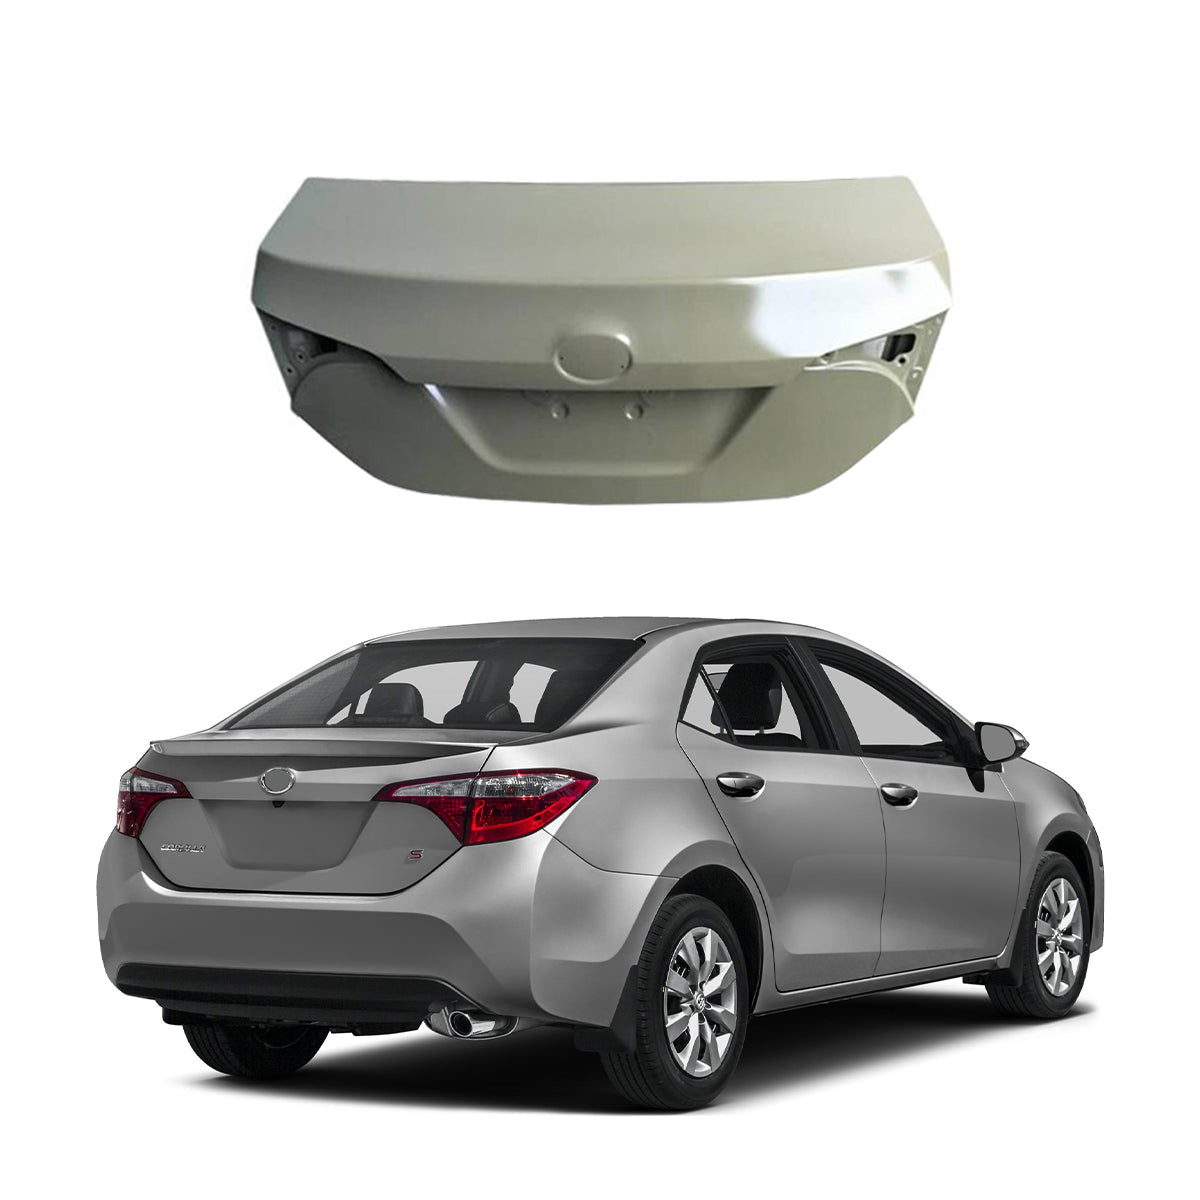 Replacement TRUNK LID, 2014-2018 Toyota Corolla, (Steel)